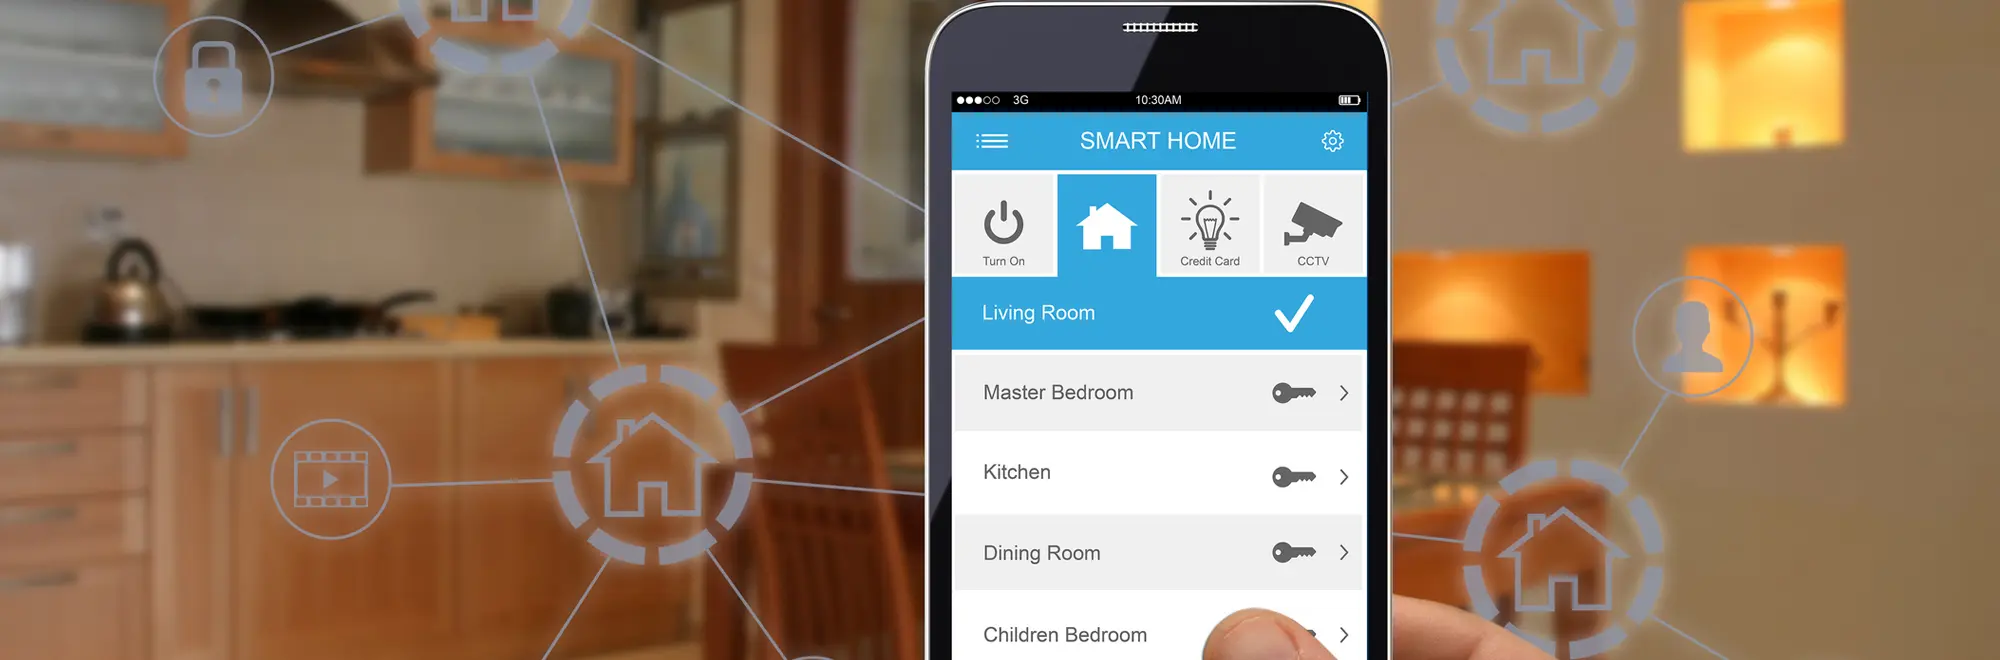 What is an intelligent home and how can it help in everyday life as a family?